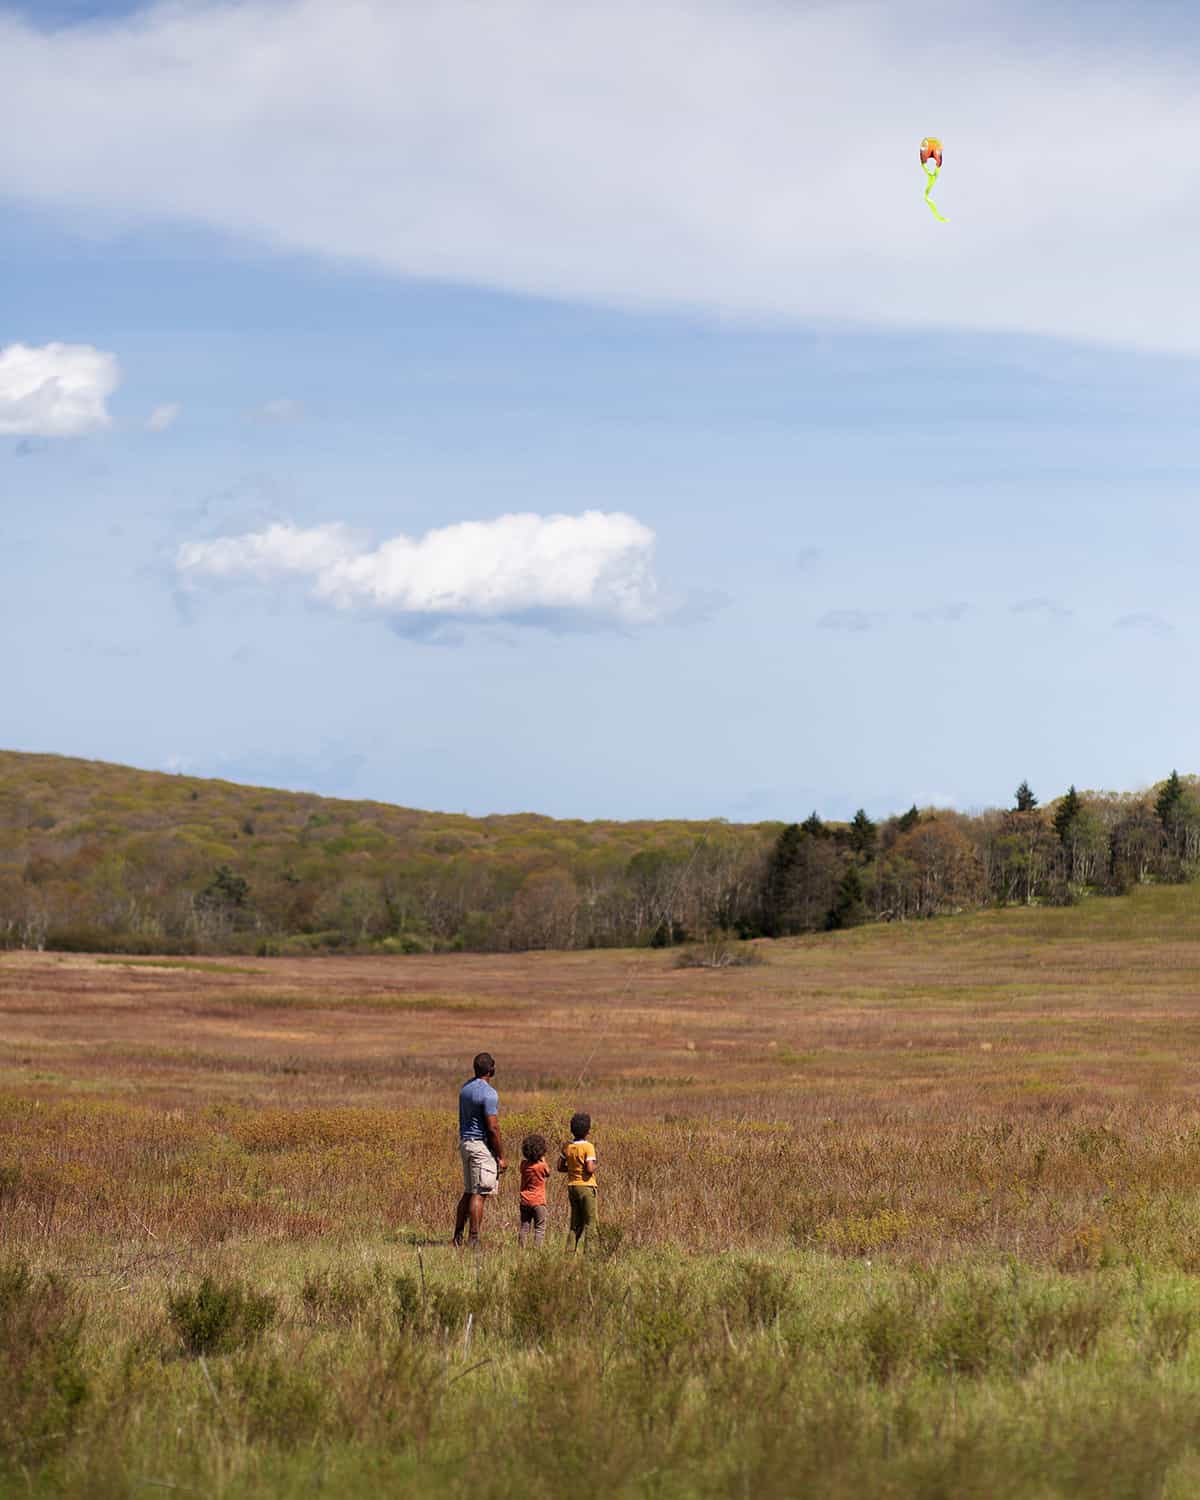 Flying a Kite with kids